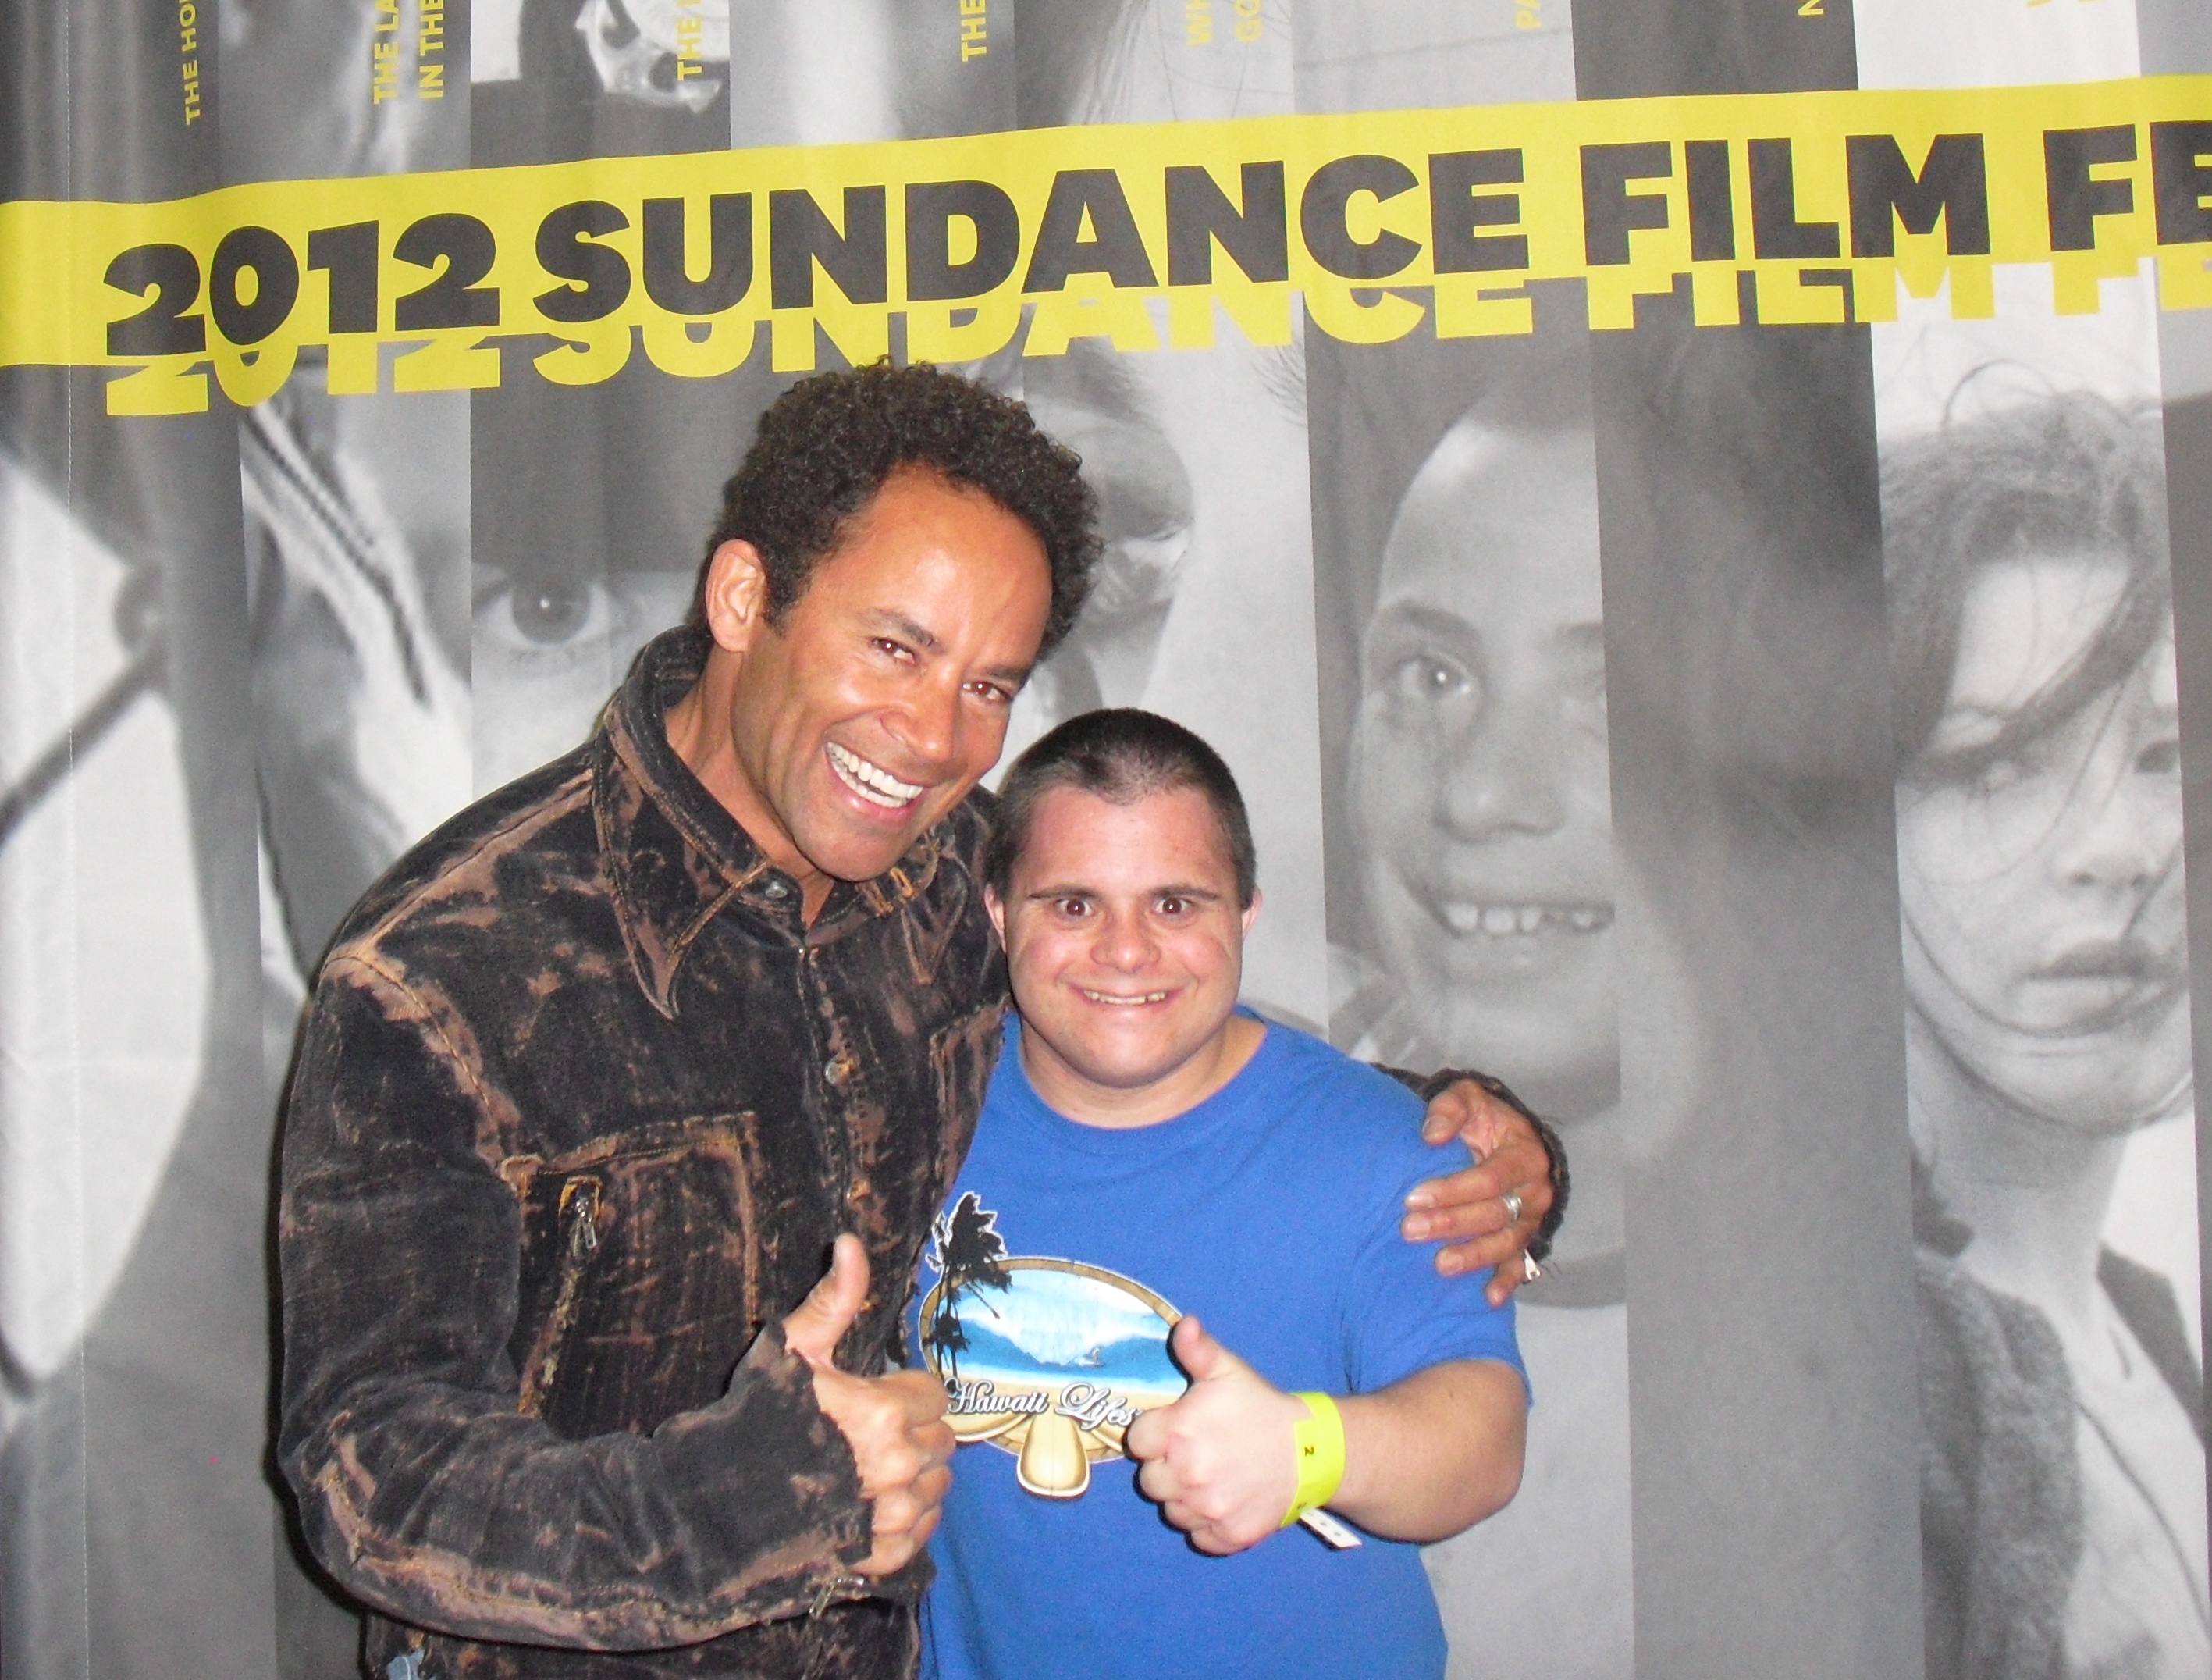 Sundance Awards 2012 with Hall of Famer Brett Banford! Thyme's charity is Special Olympics Northern California of which he contributes annually both financially and personally with his time since 1996 thru present.